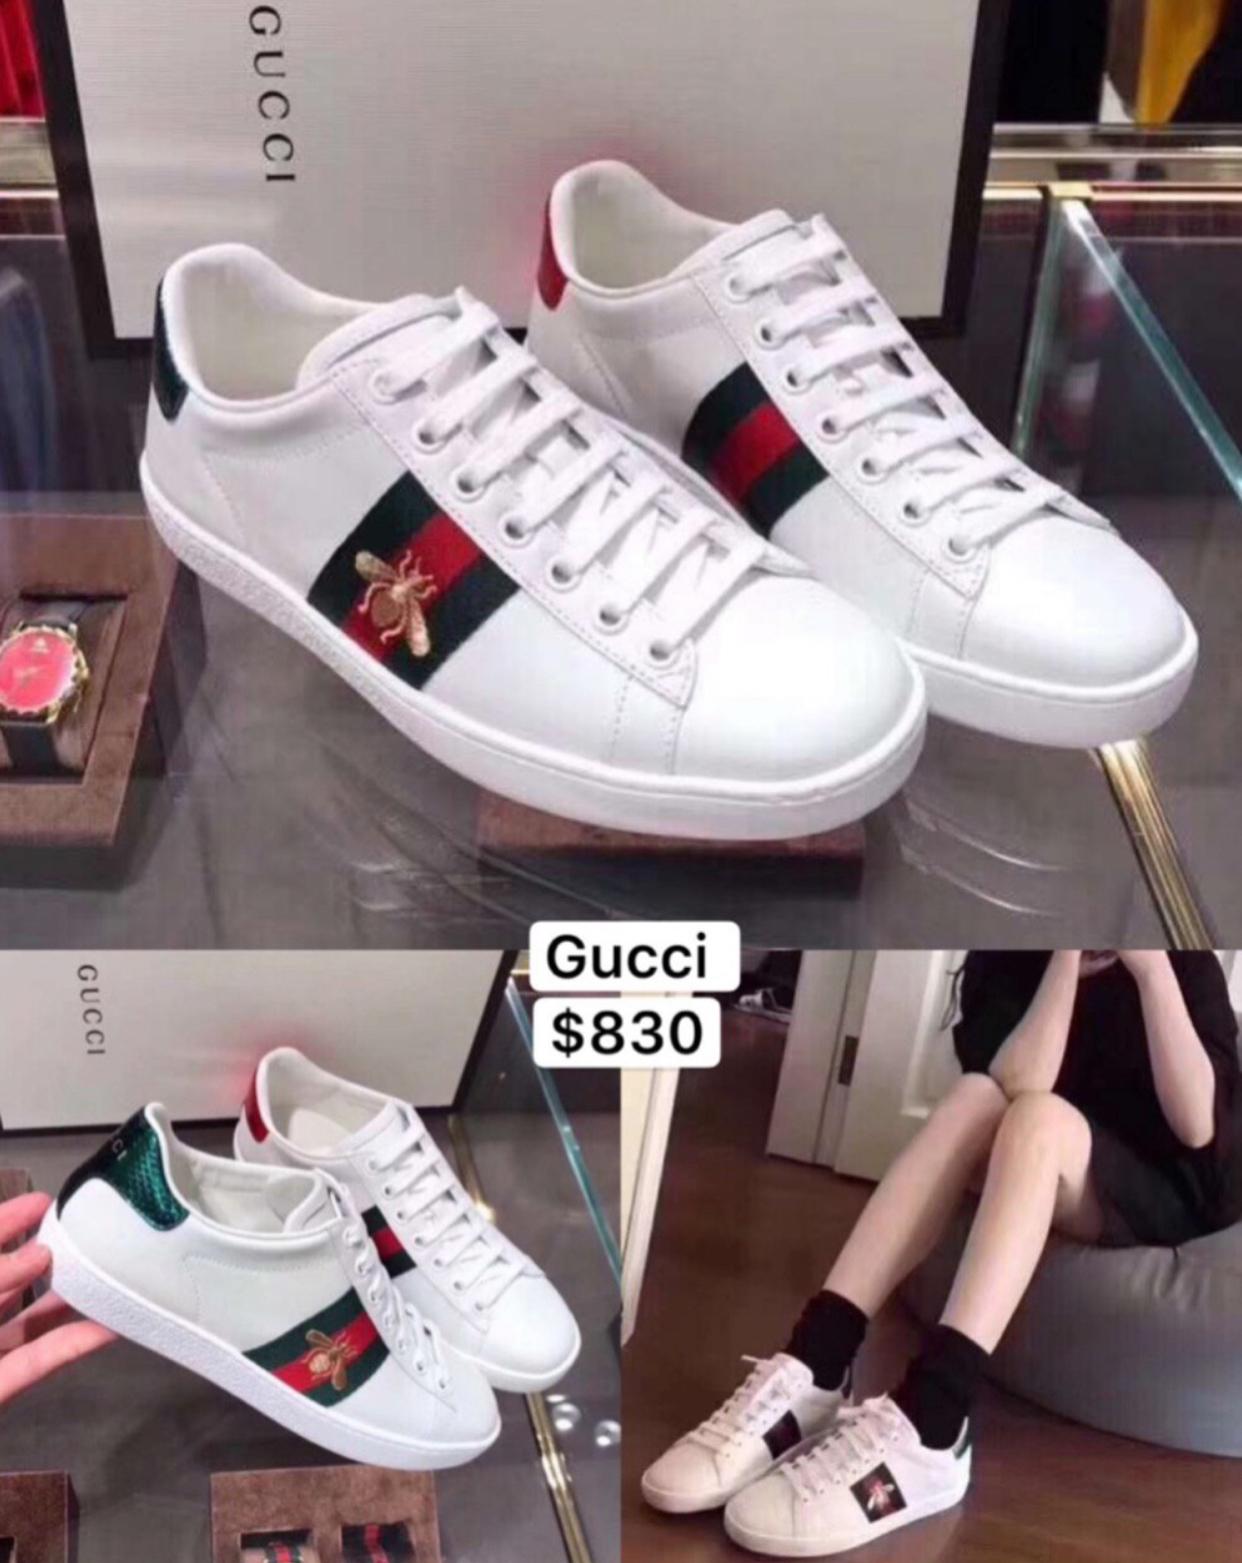 cheapest place to buy gucci shoes